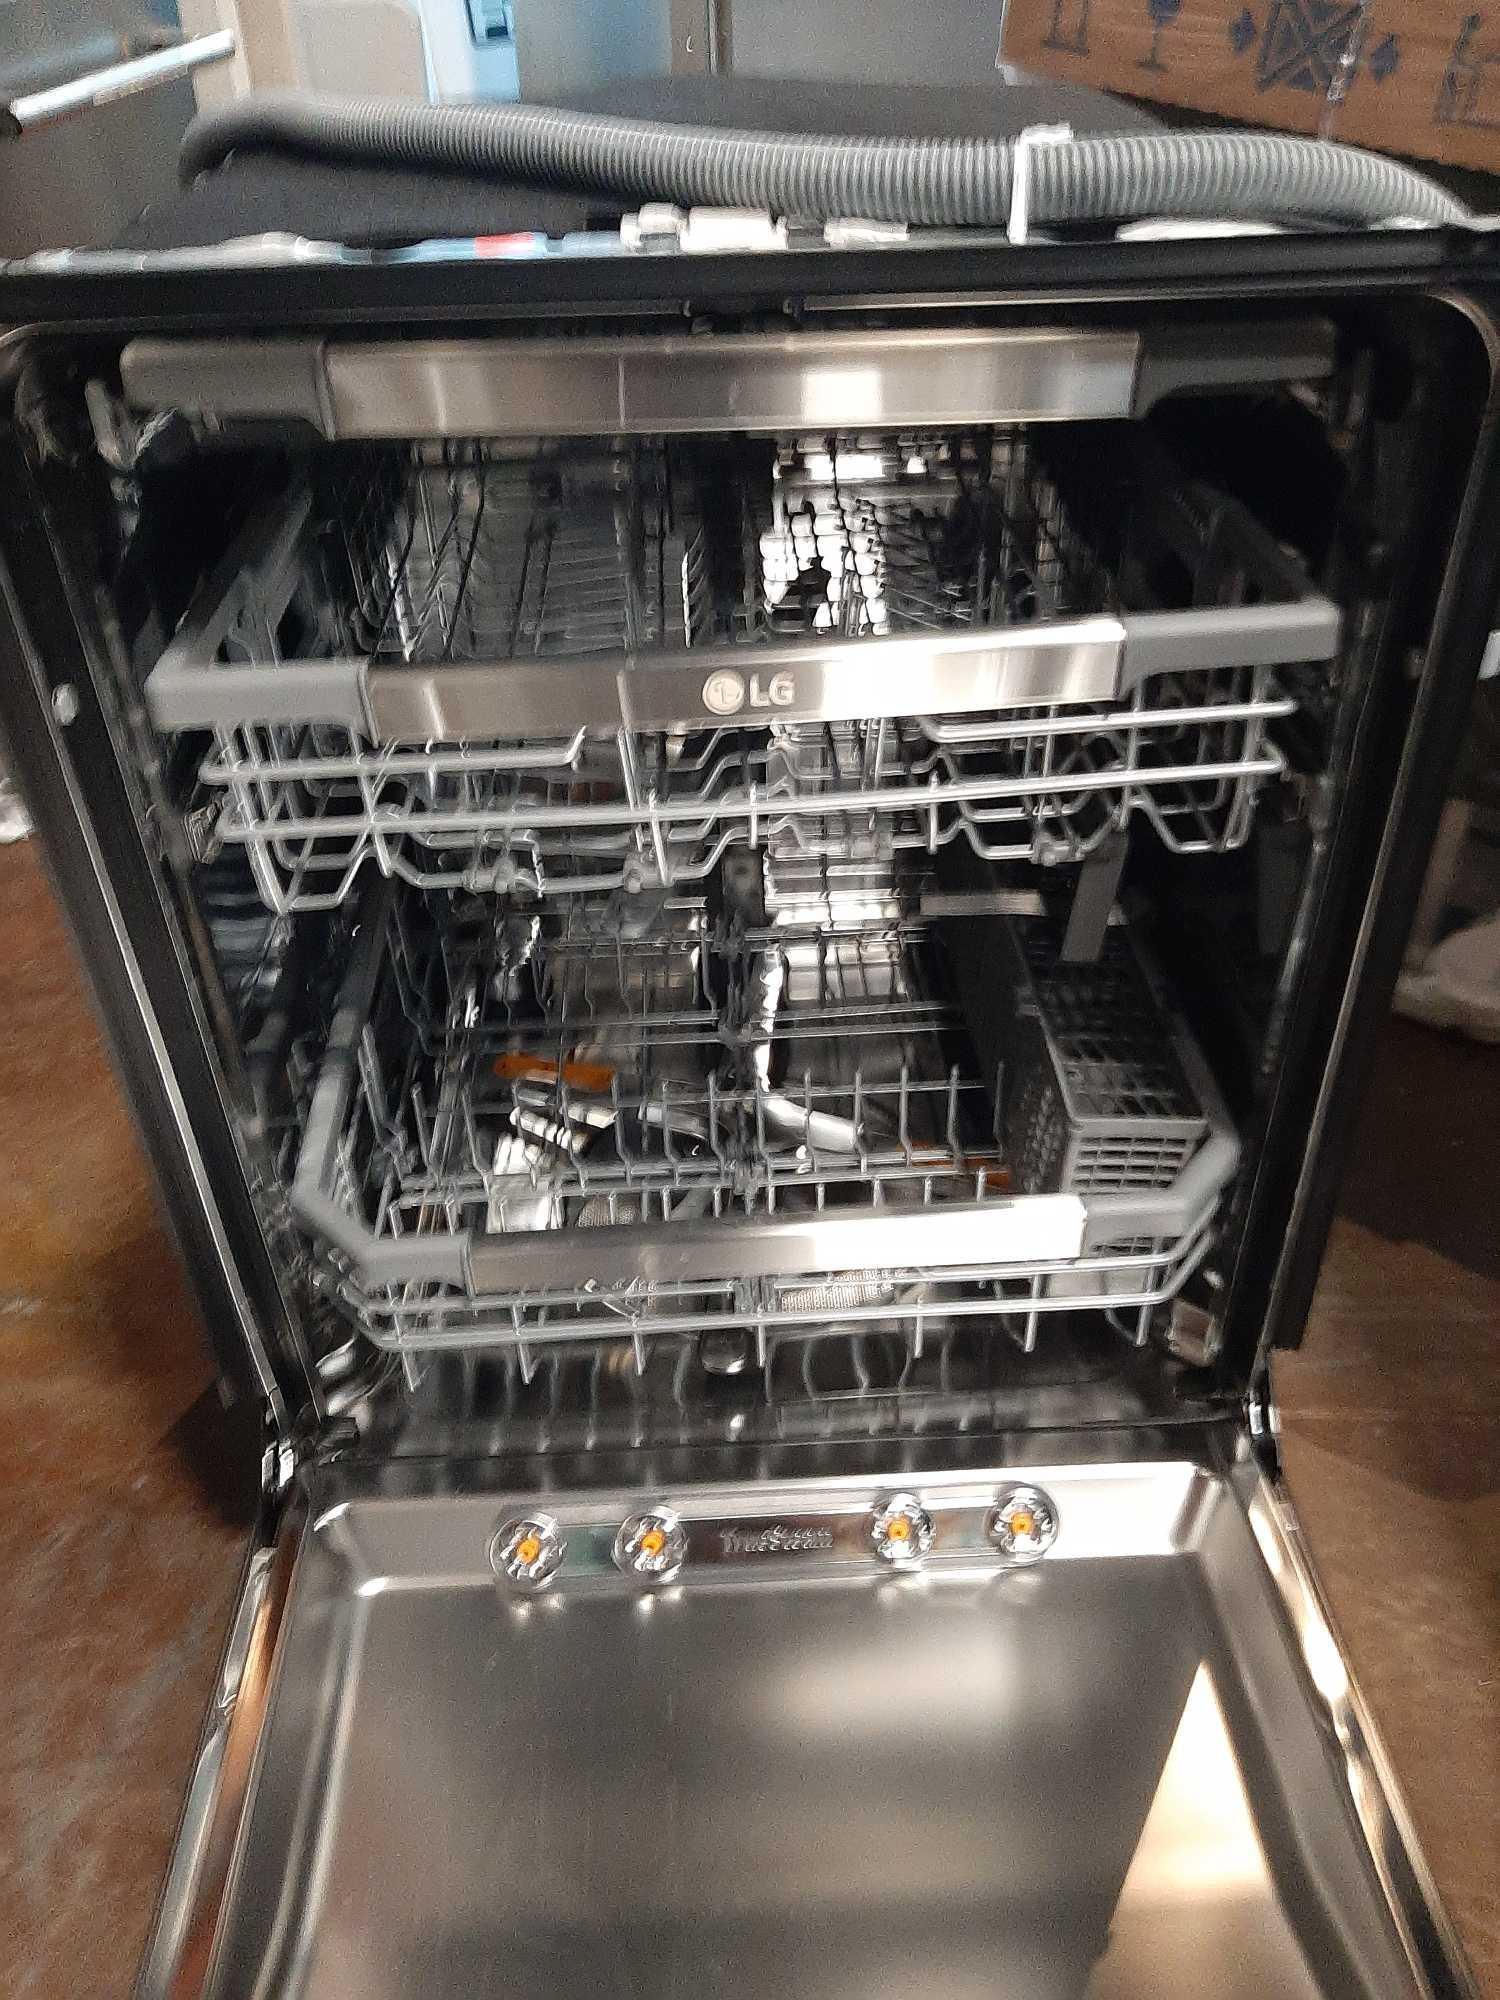 LG 24 in. Top Control Smart Built in Dishwasher*PREVIOUSLY INSTALLED*